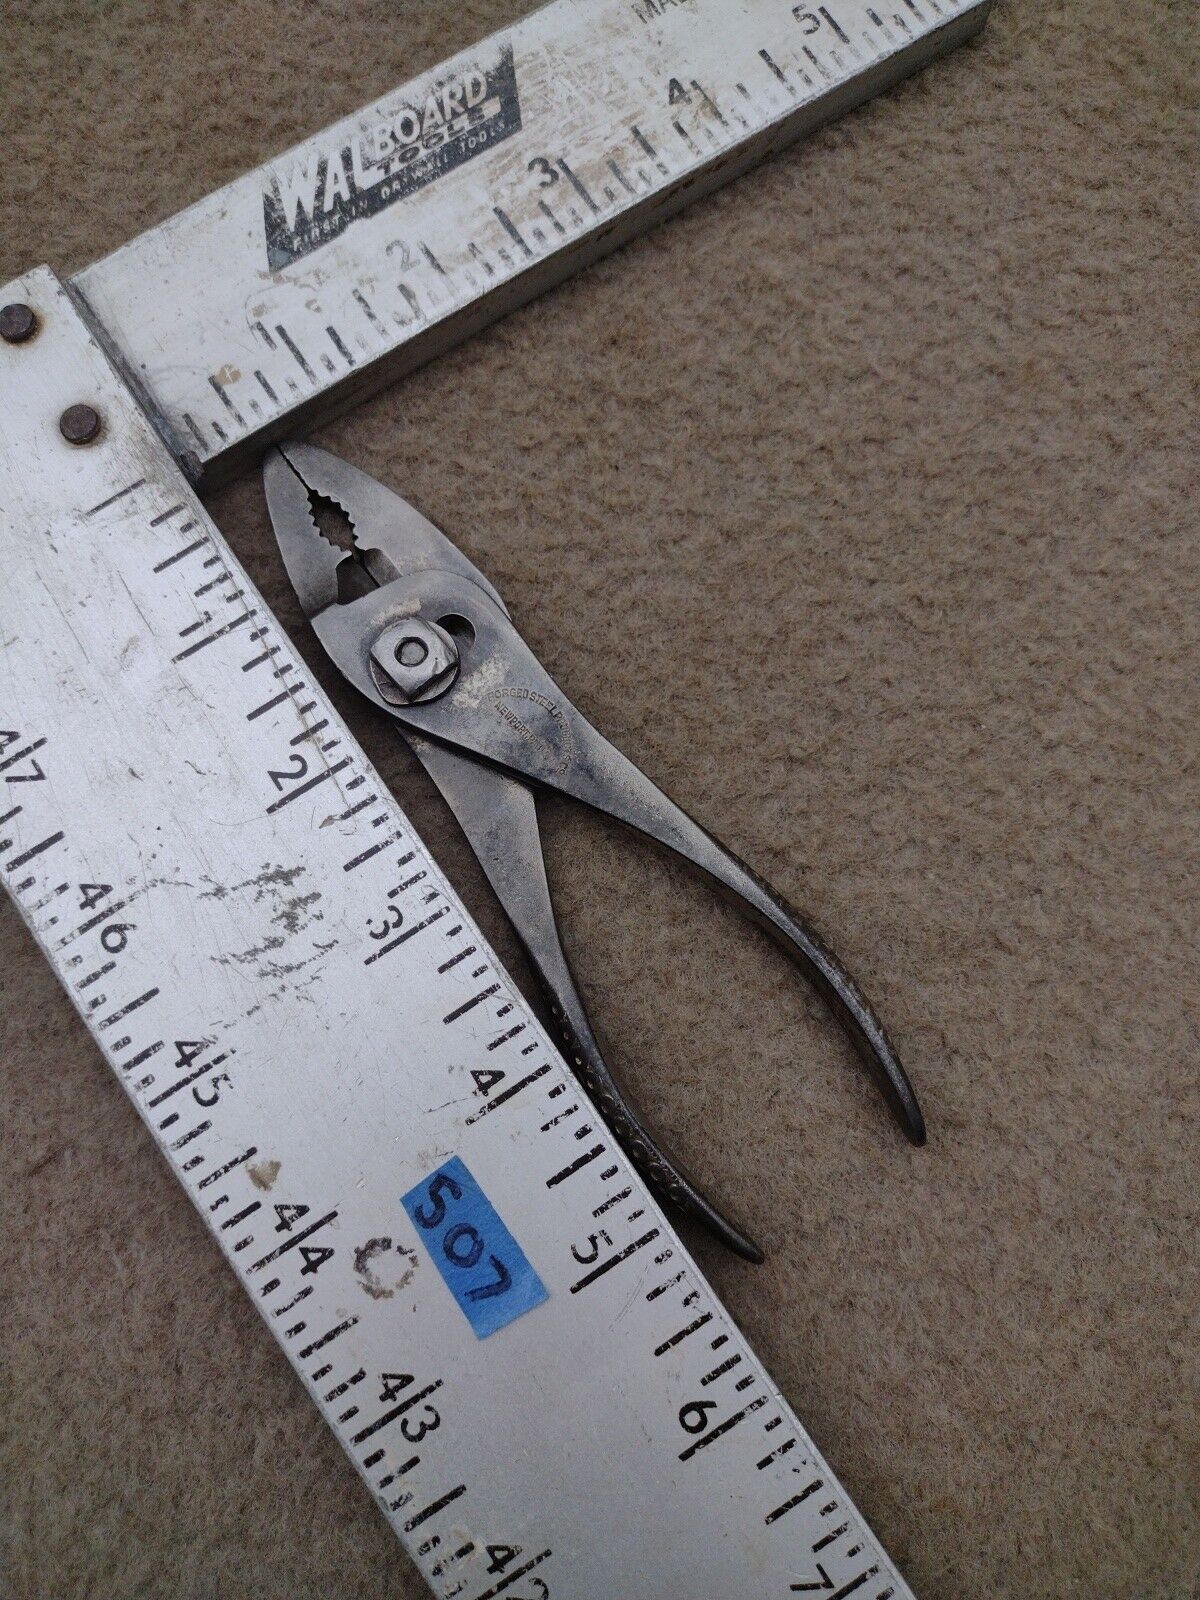 Forged Steel Products Co Vacuum Grip Slip Joint Pliers No. 65 Thin Nose USA Made